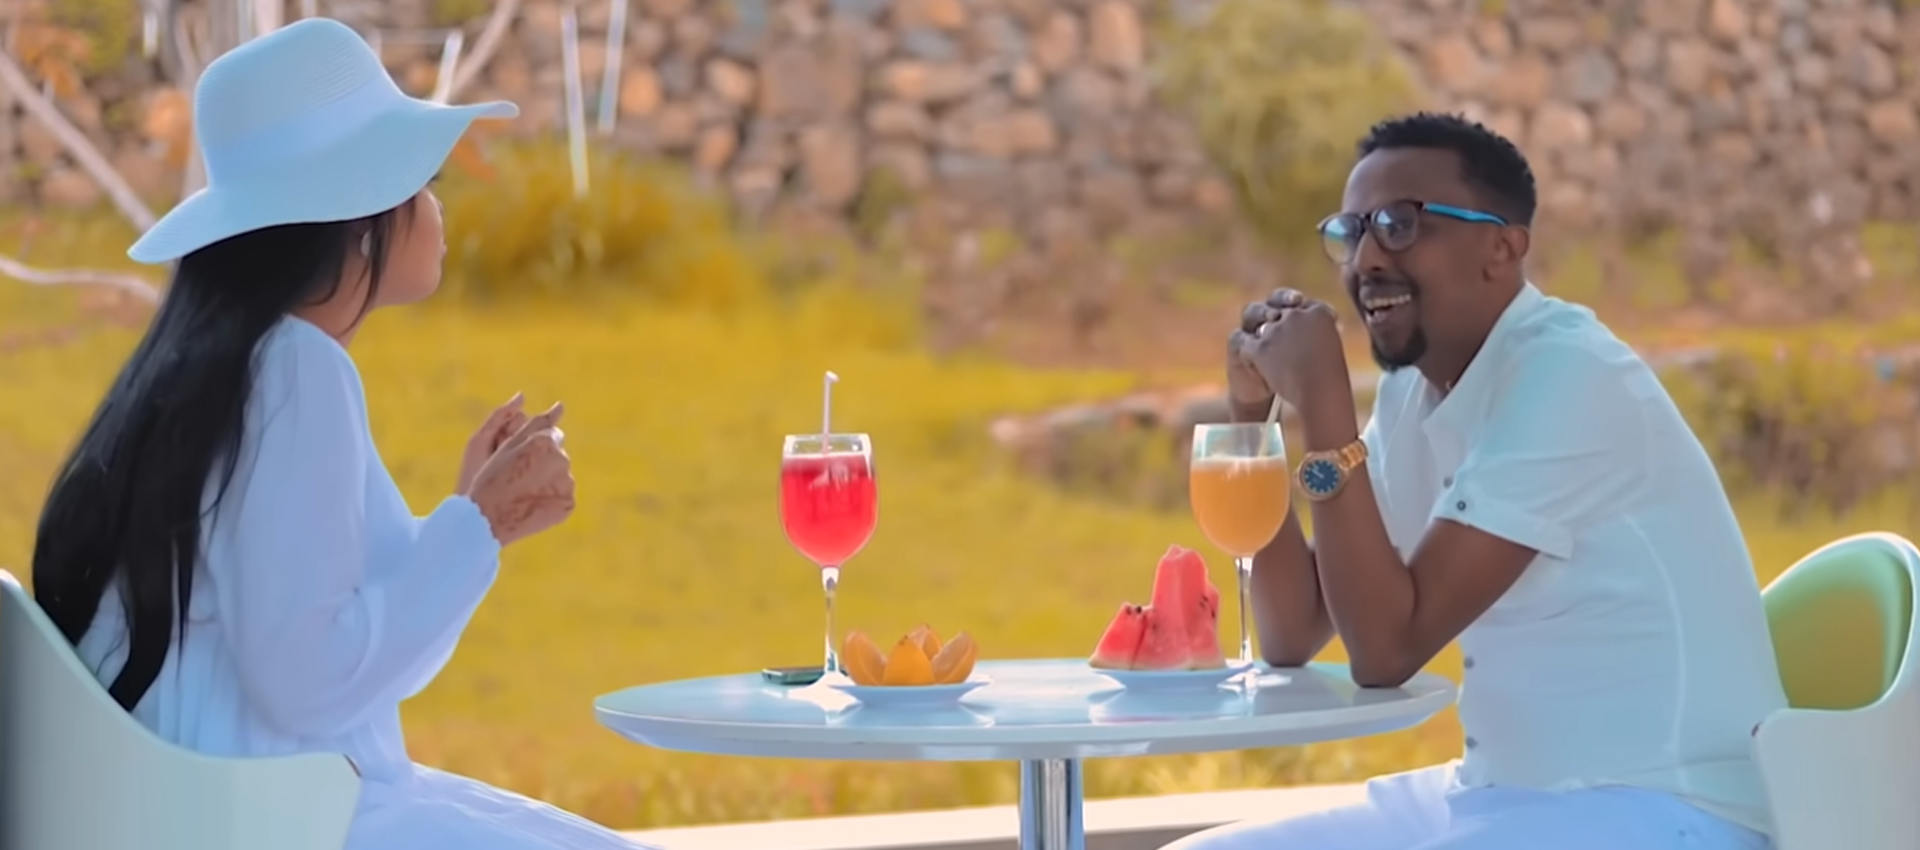 Controversial Divorce Shocks Somali Music Fans and Social Media: Awale Adan and Xiis' Unexpected Split Dominates Conversations